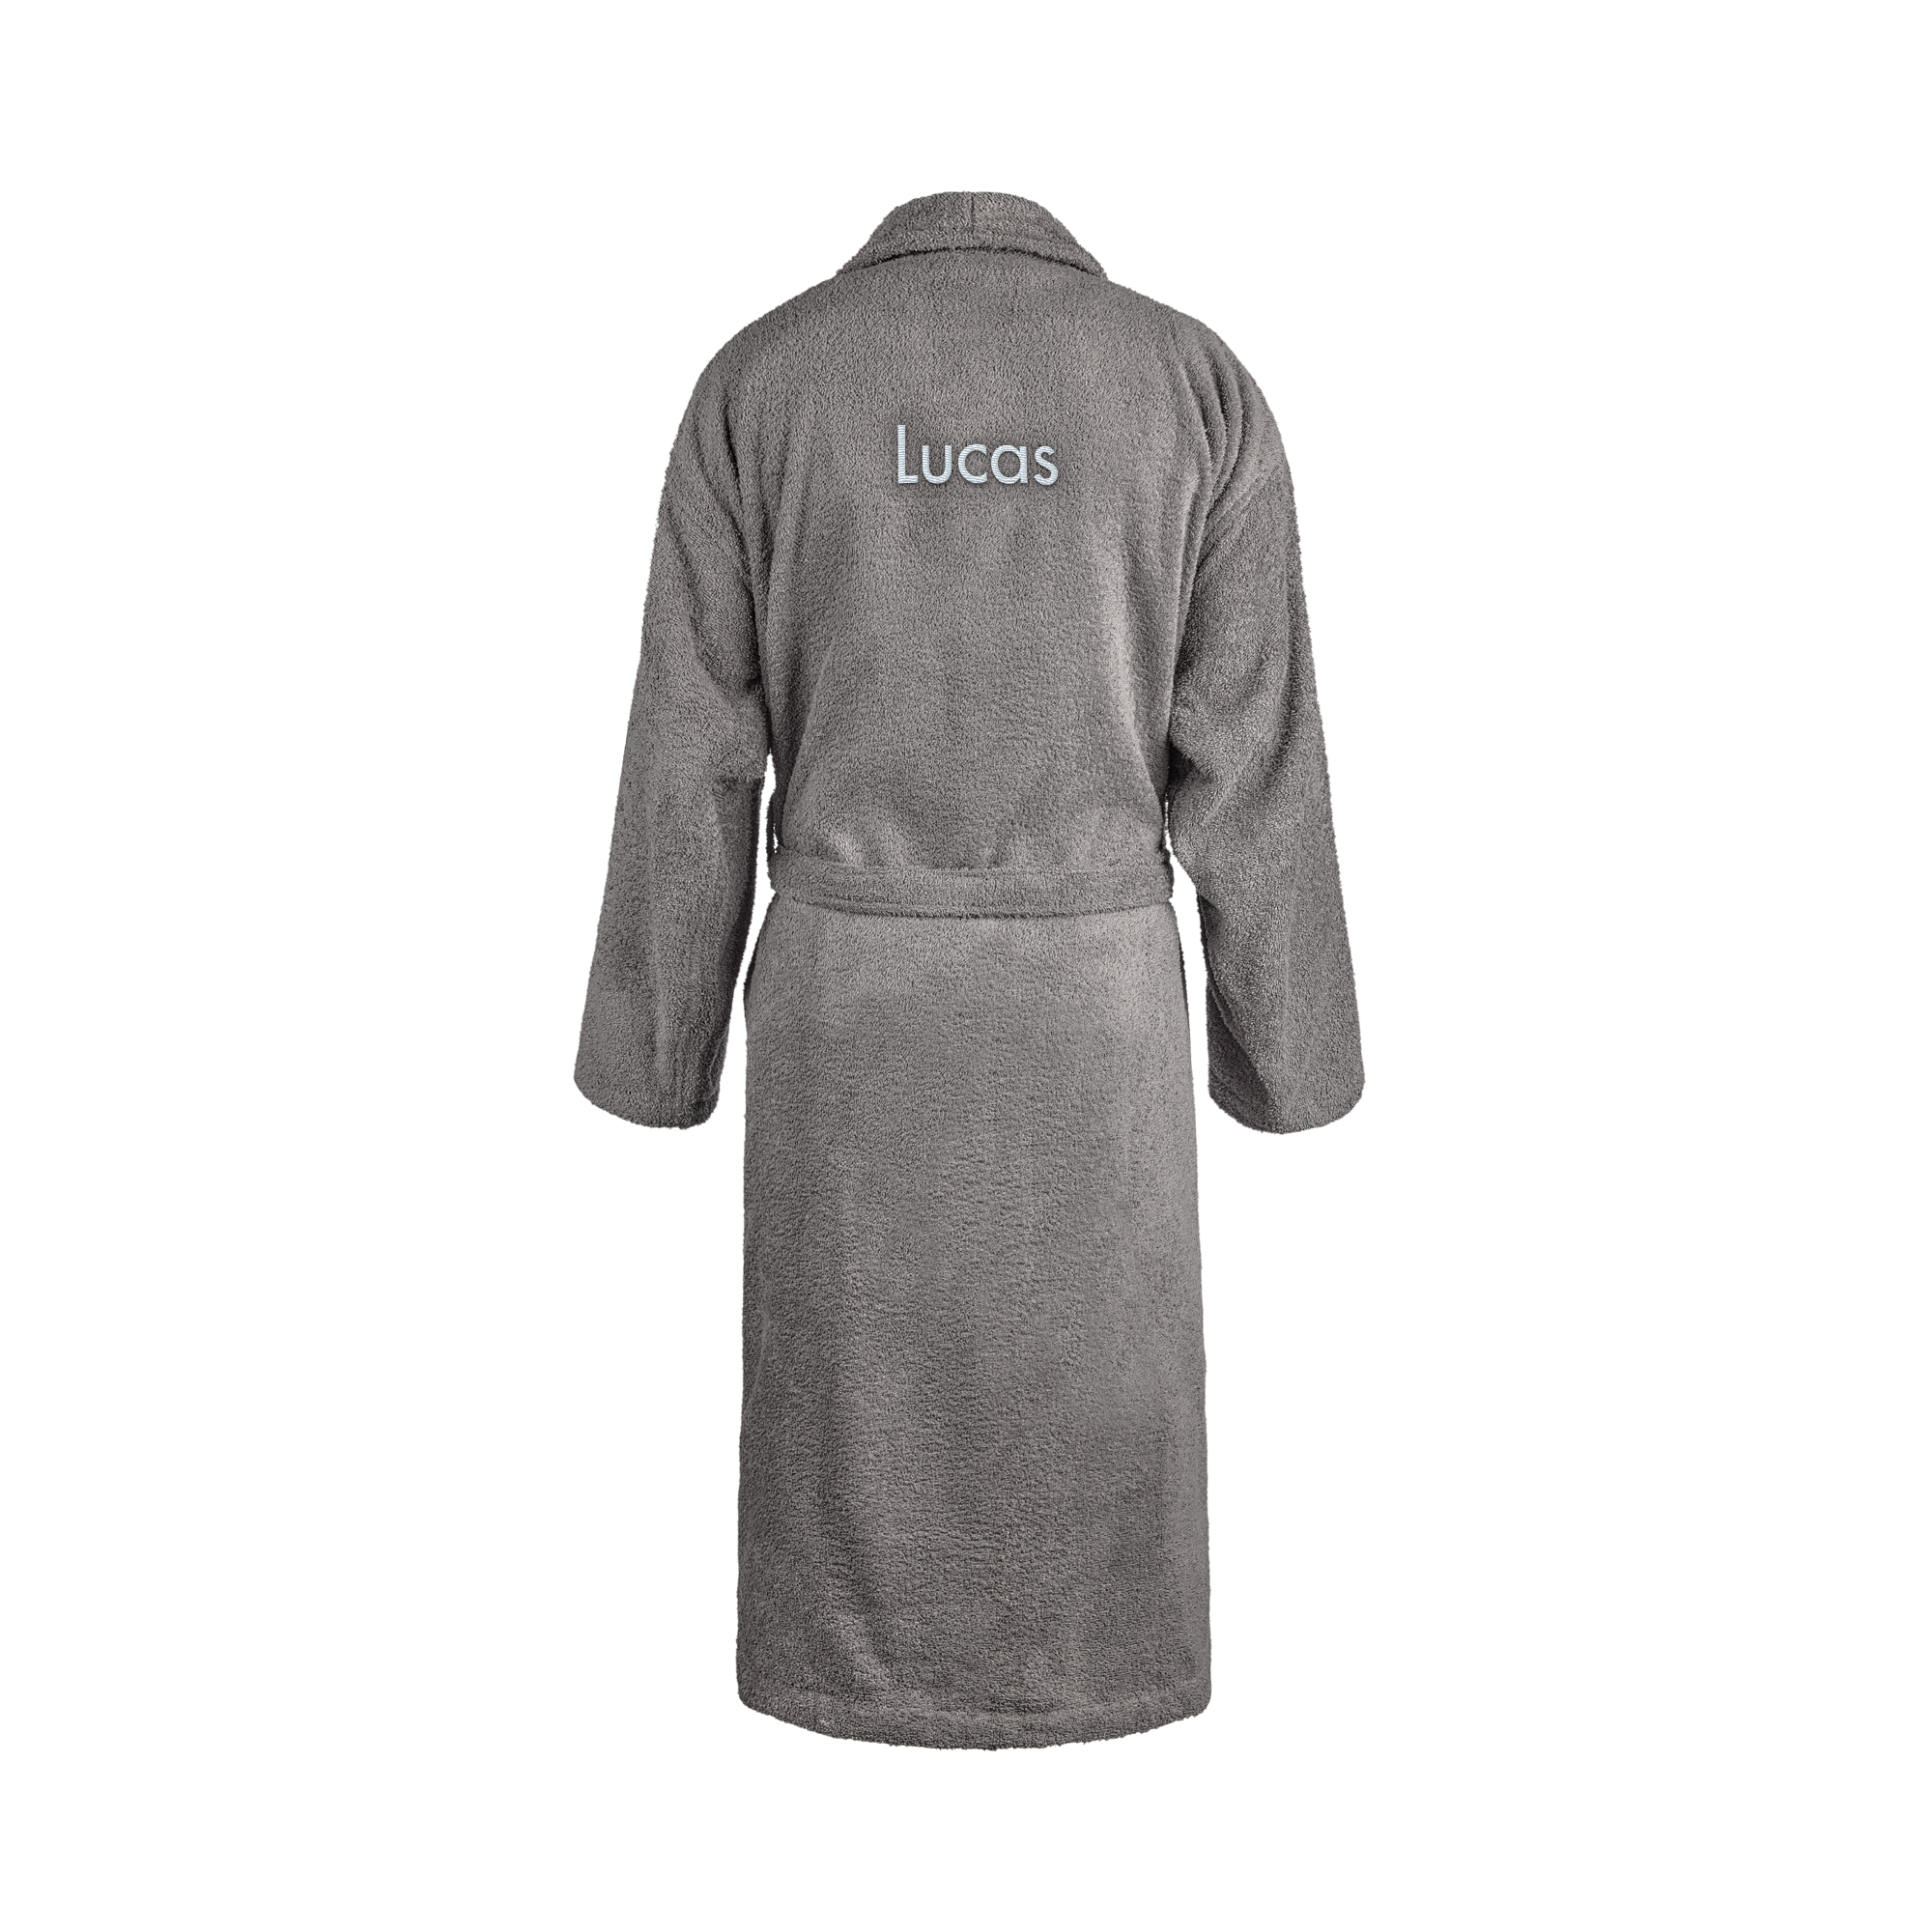 Bathrobe for Men With Text - Grey S/M